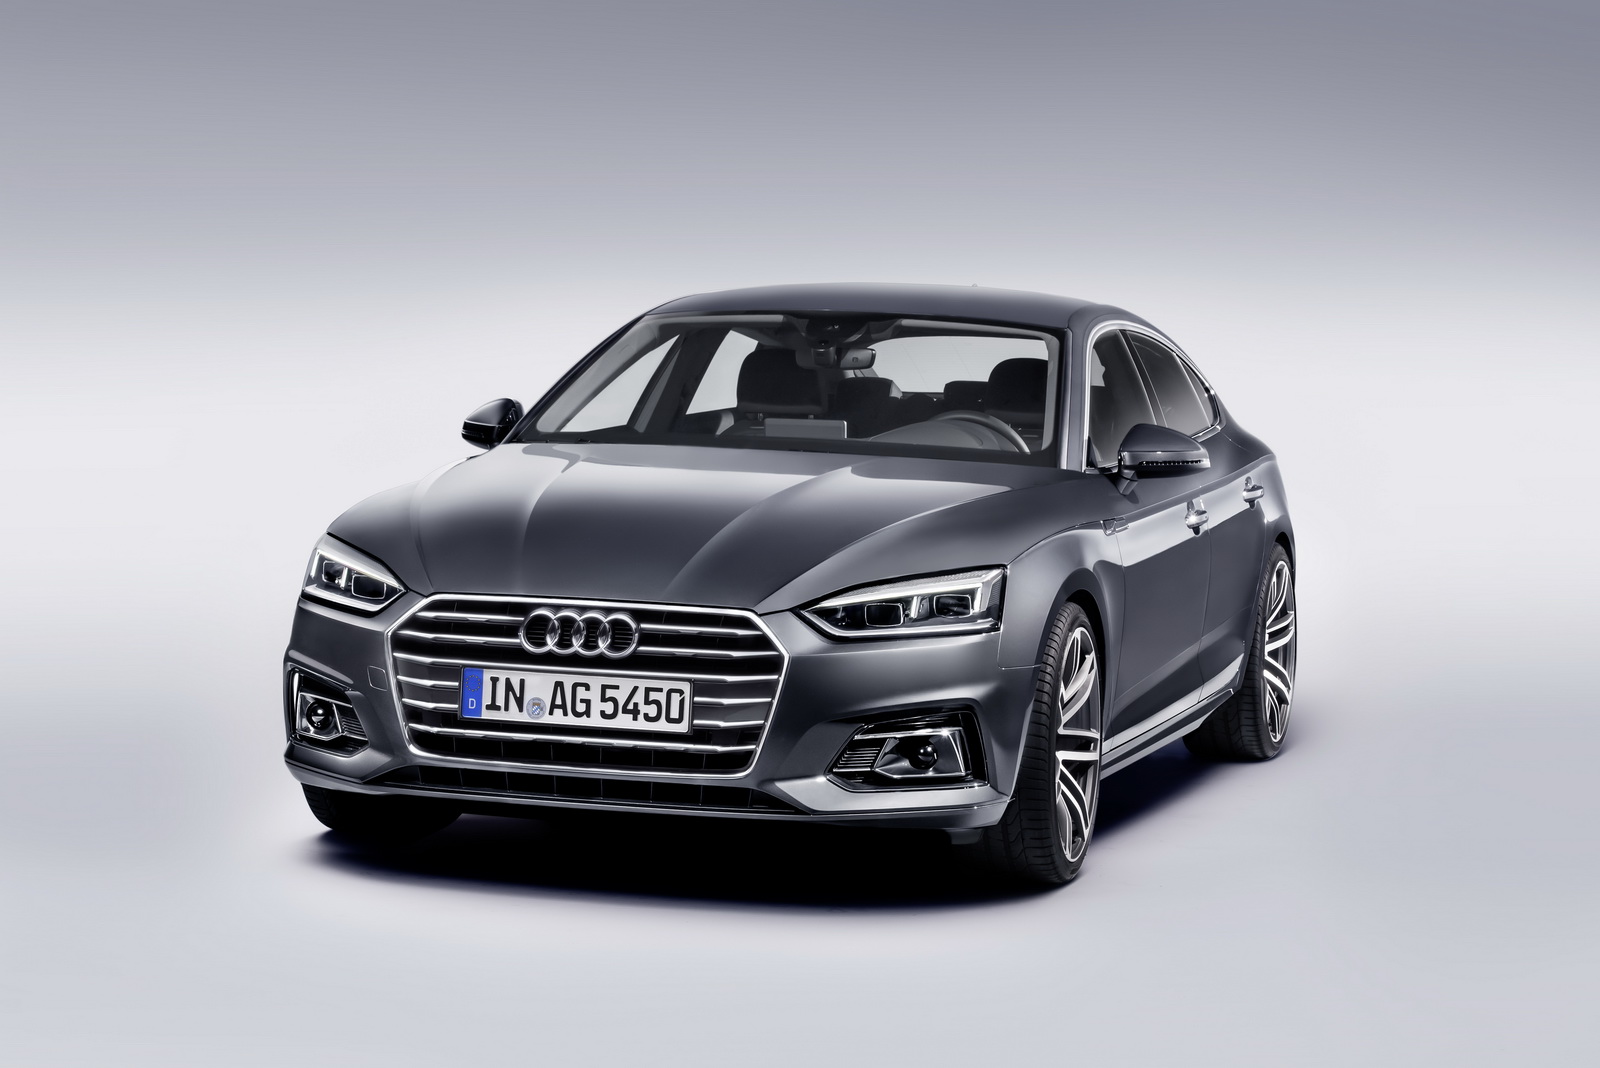 New Audi A4 Avant And A5 Sportback G-Tron Models Launched In